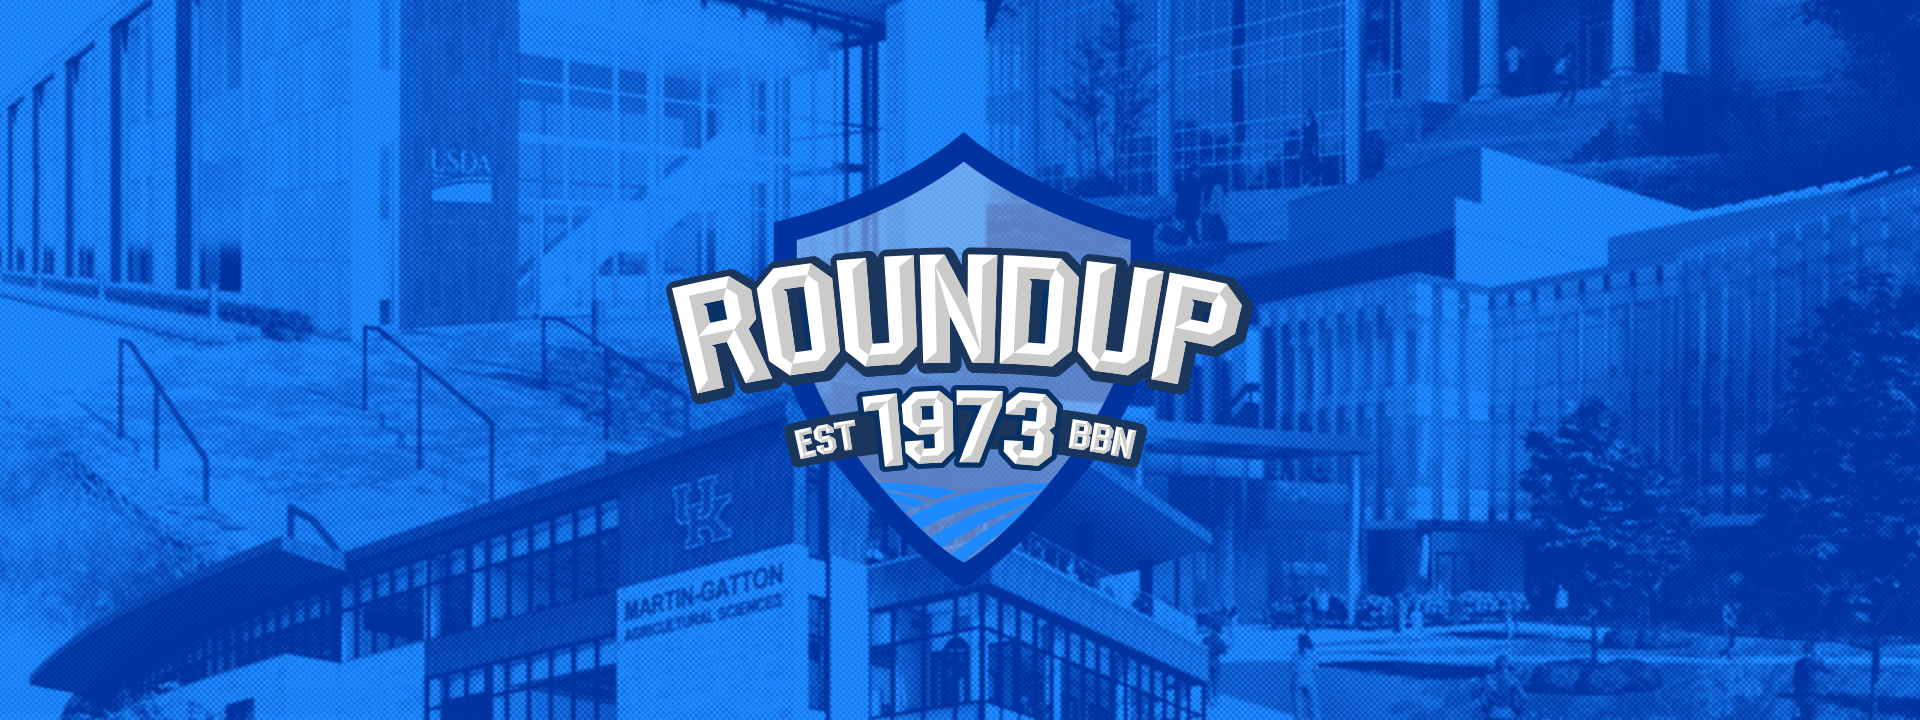 Decorative header for Roundup